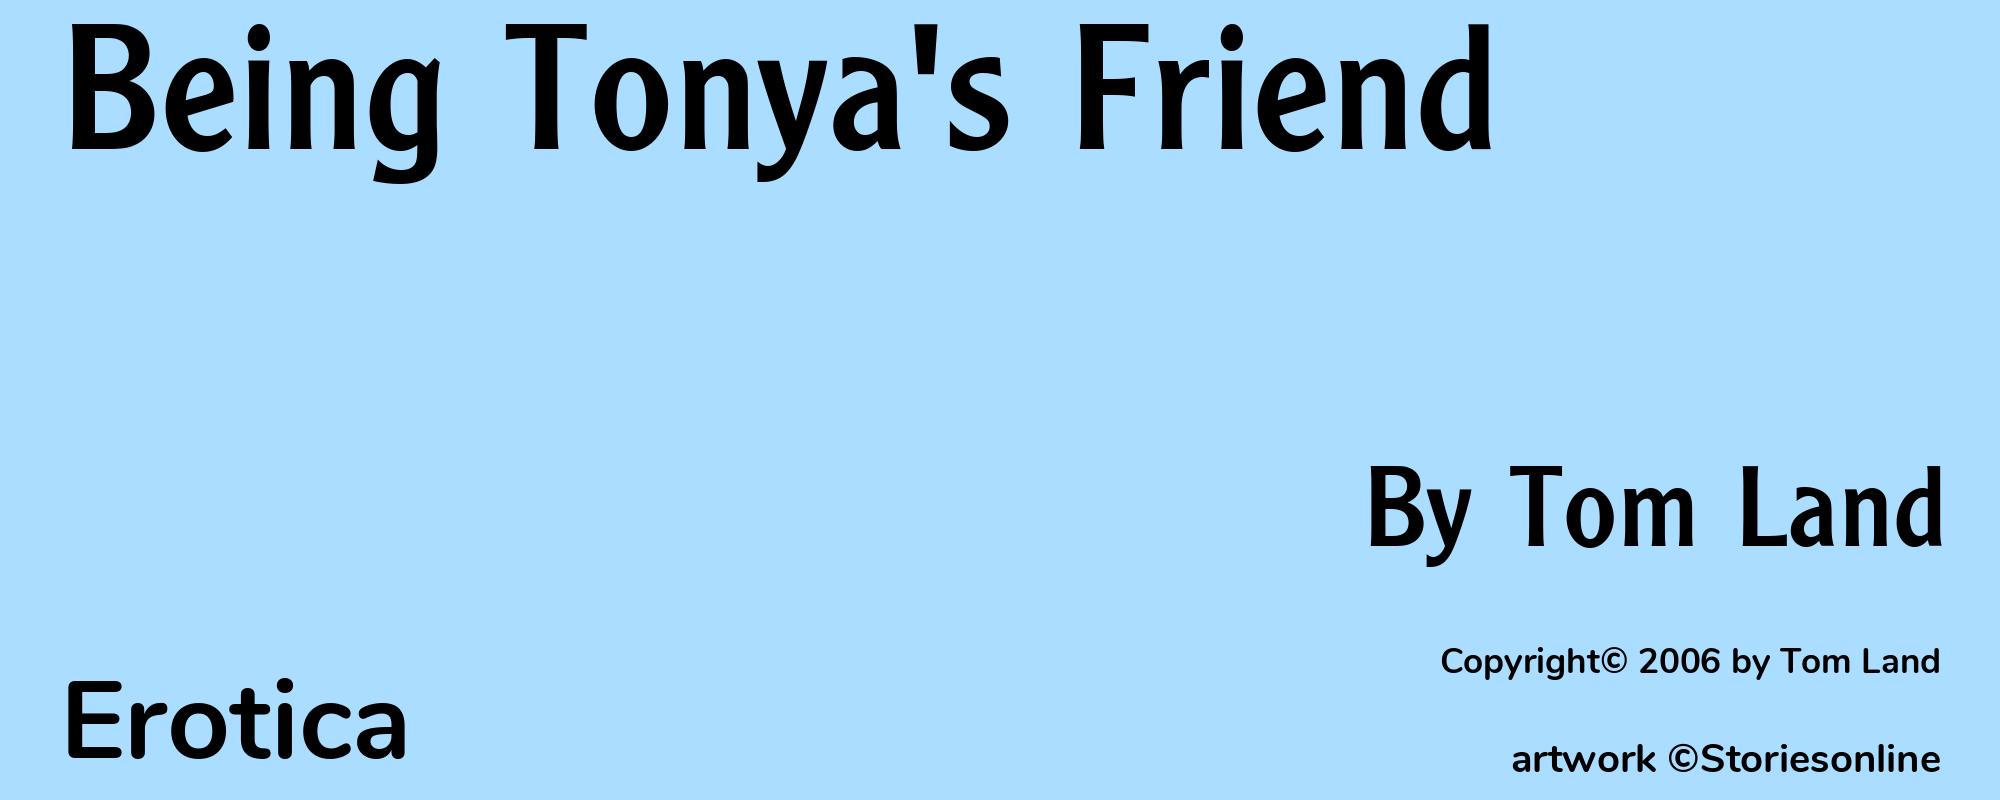 Being Tonya's Friend - Cover